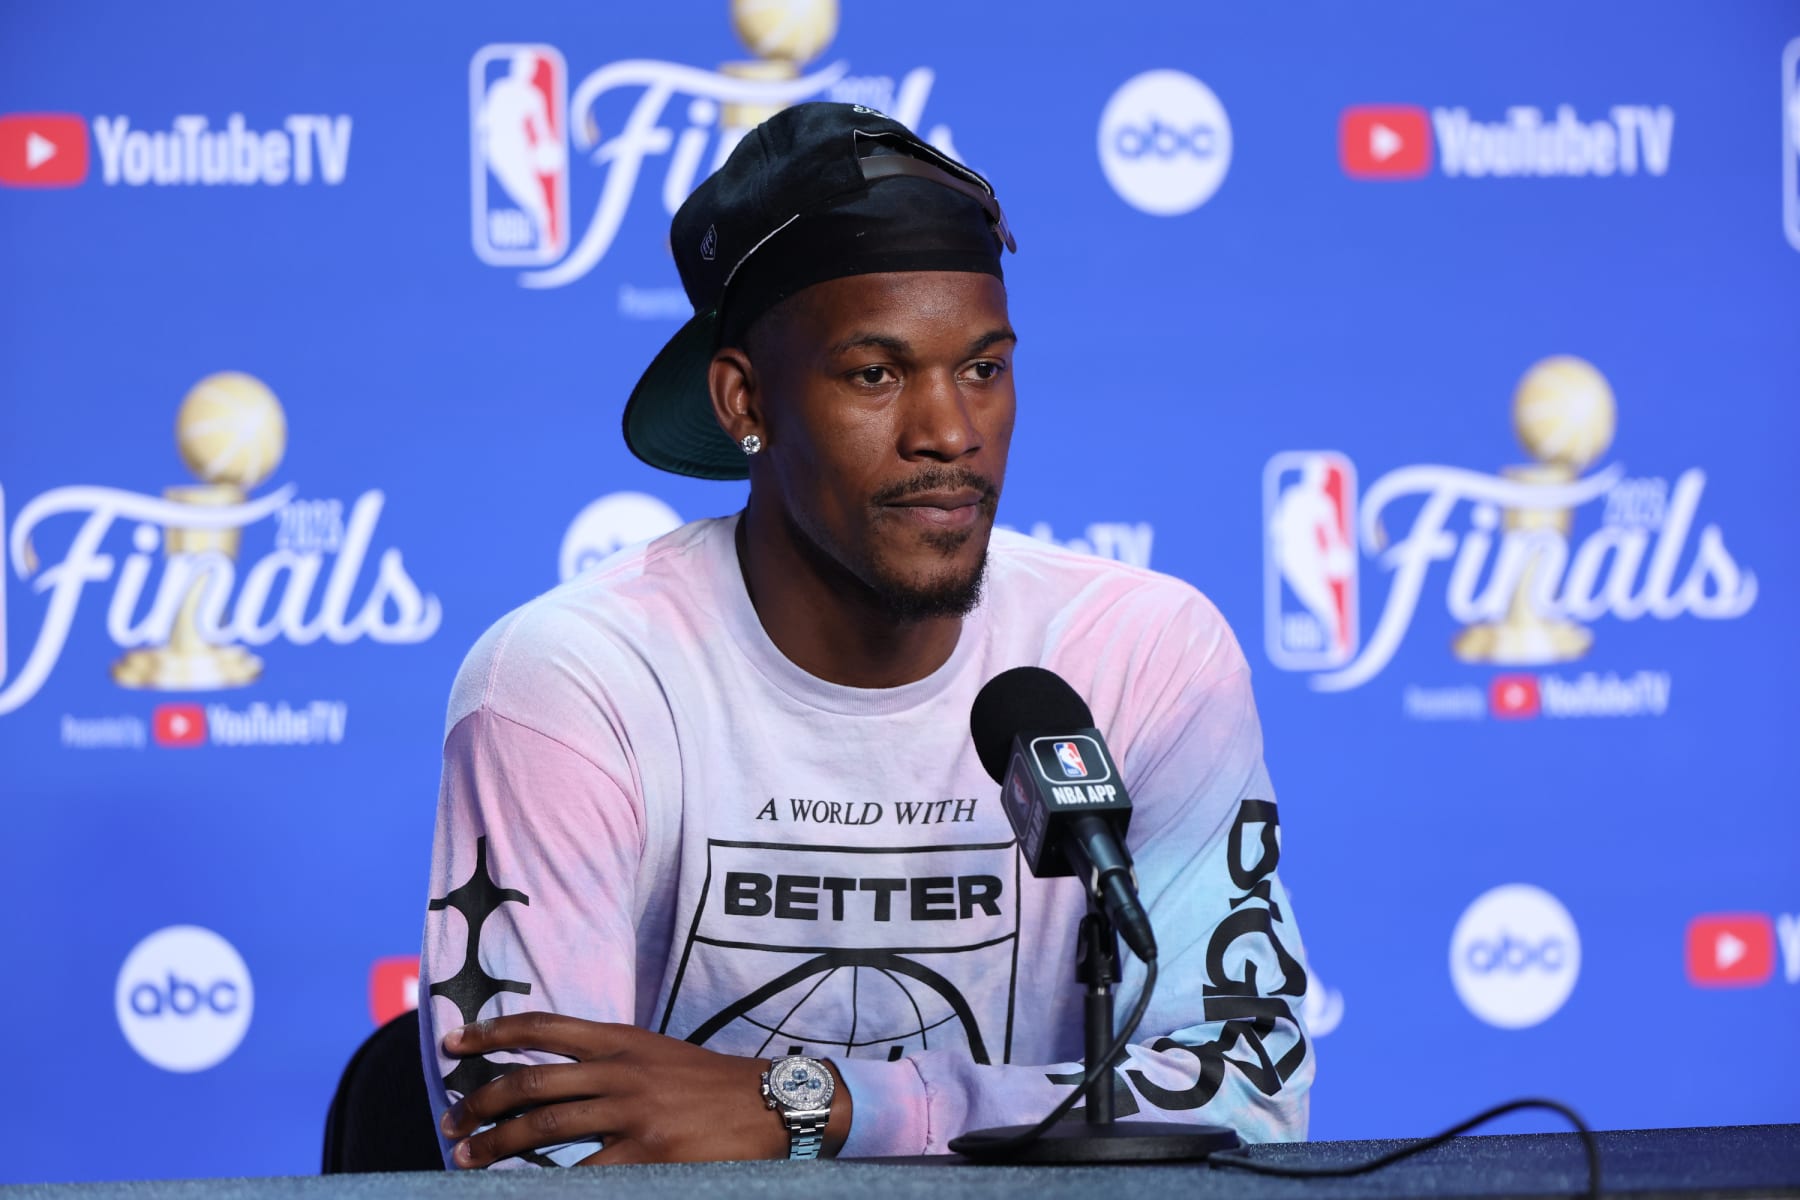 NBA Finals: My chat with Jimmy Butler's agent while watching Game 1